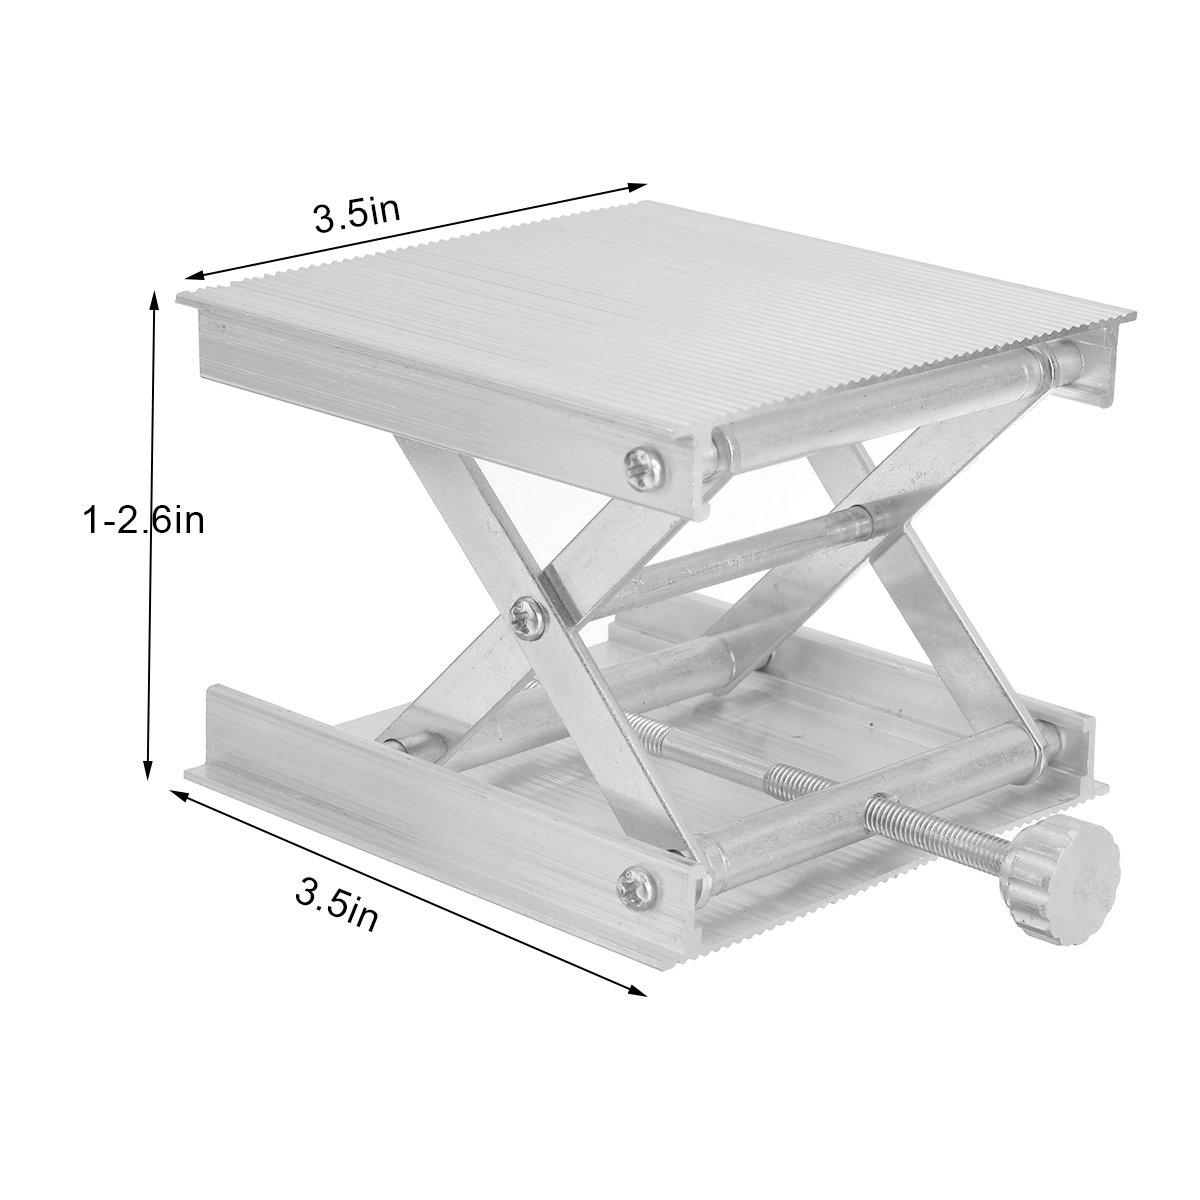 25-65-99cm-Aluminum-Router-Table-Woodworking-Engraving-Lab-Lifting-Stand-Rack-Platform-Benches-1861024-7